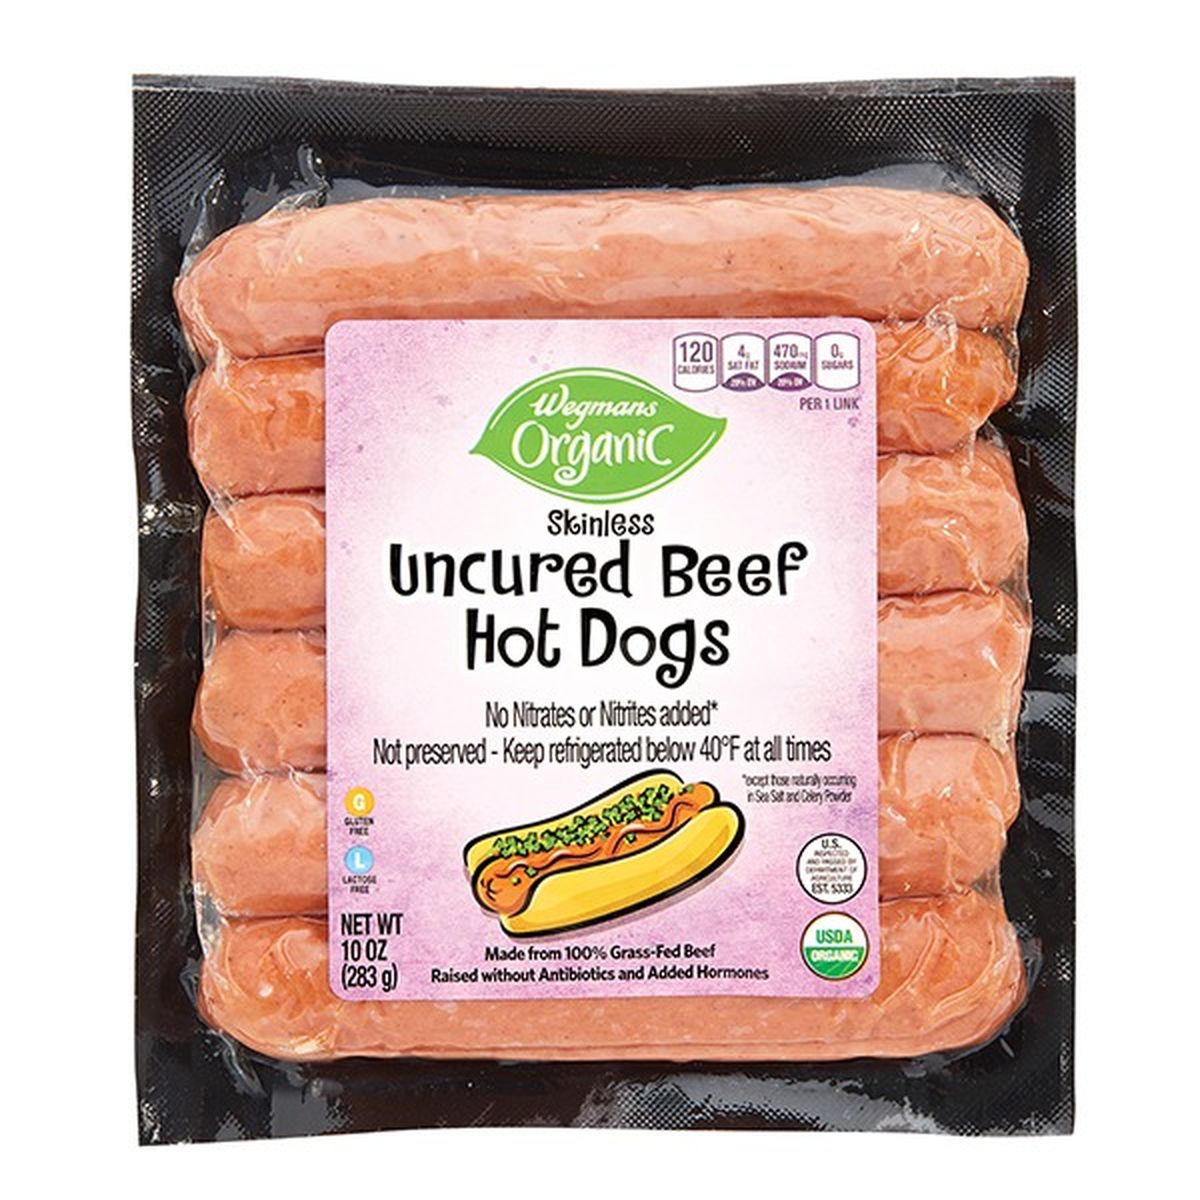 Calories in Wegmans Organic Hot Dogs, Skinless, Uncured